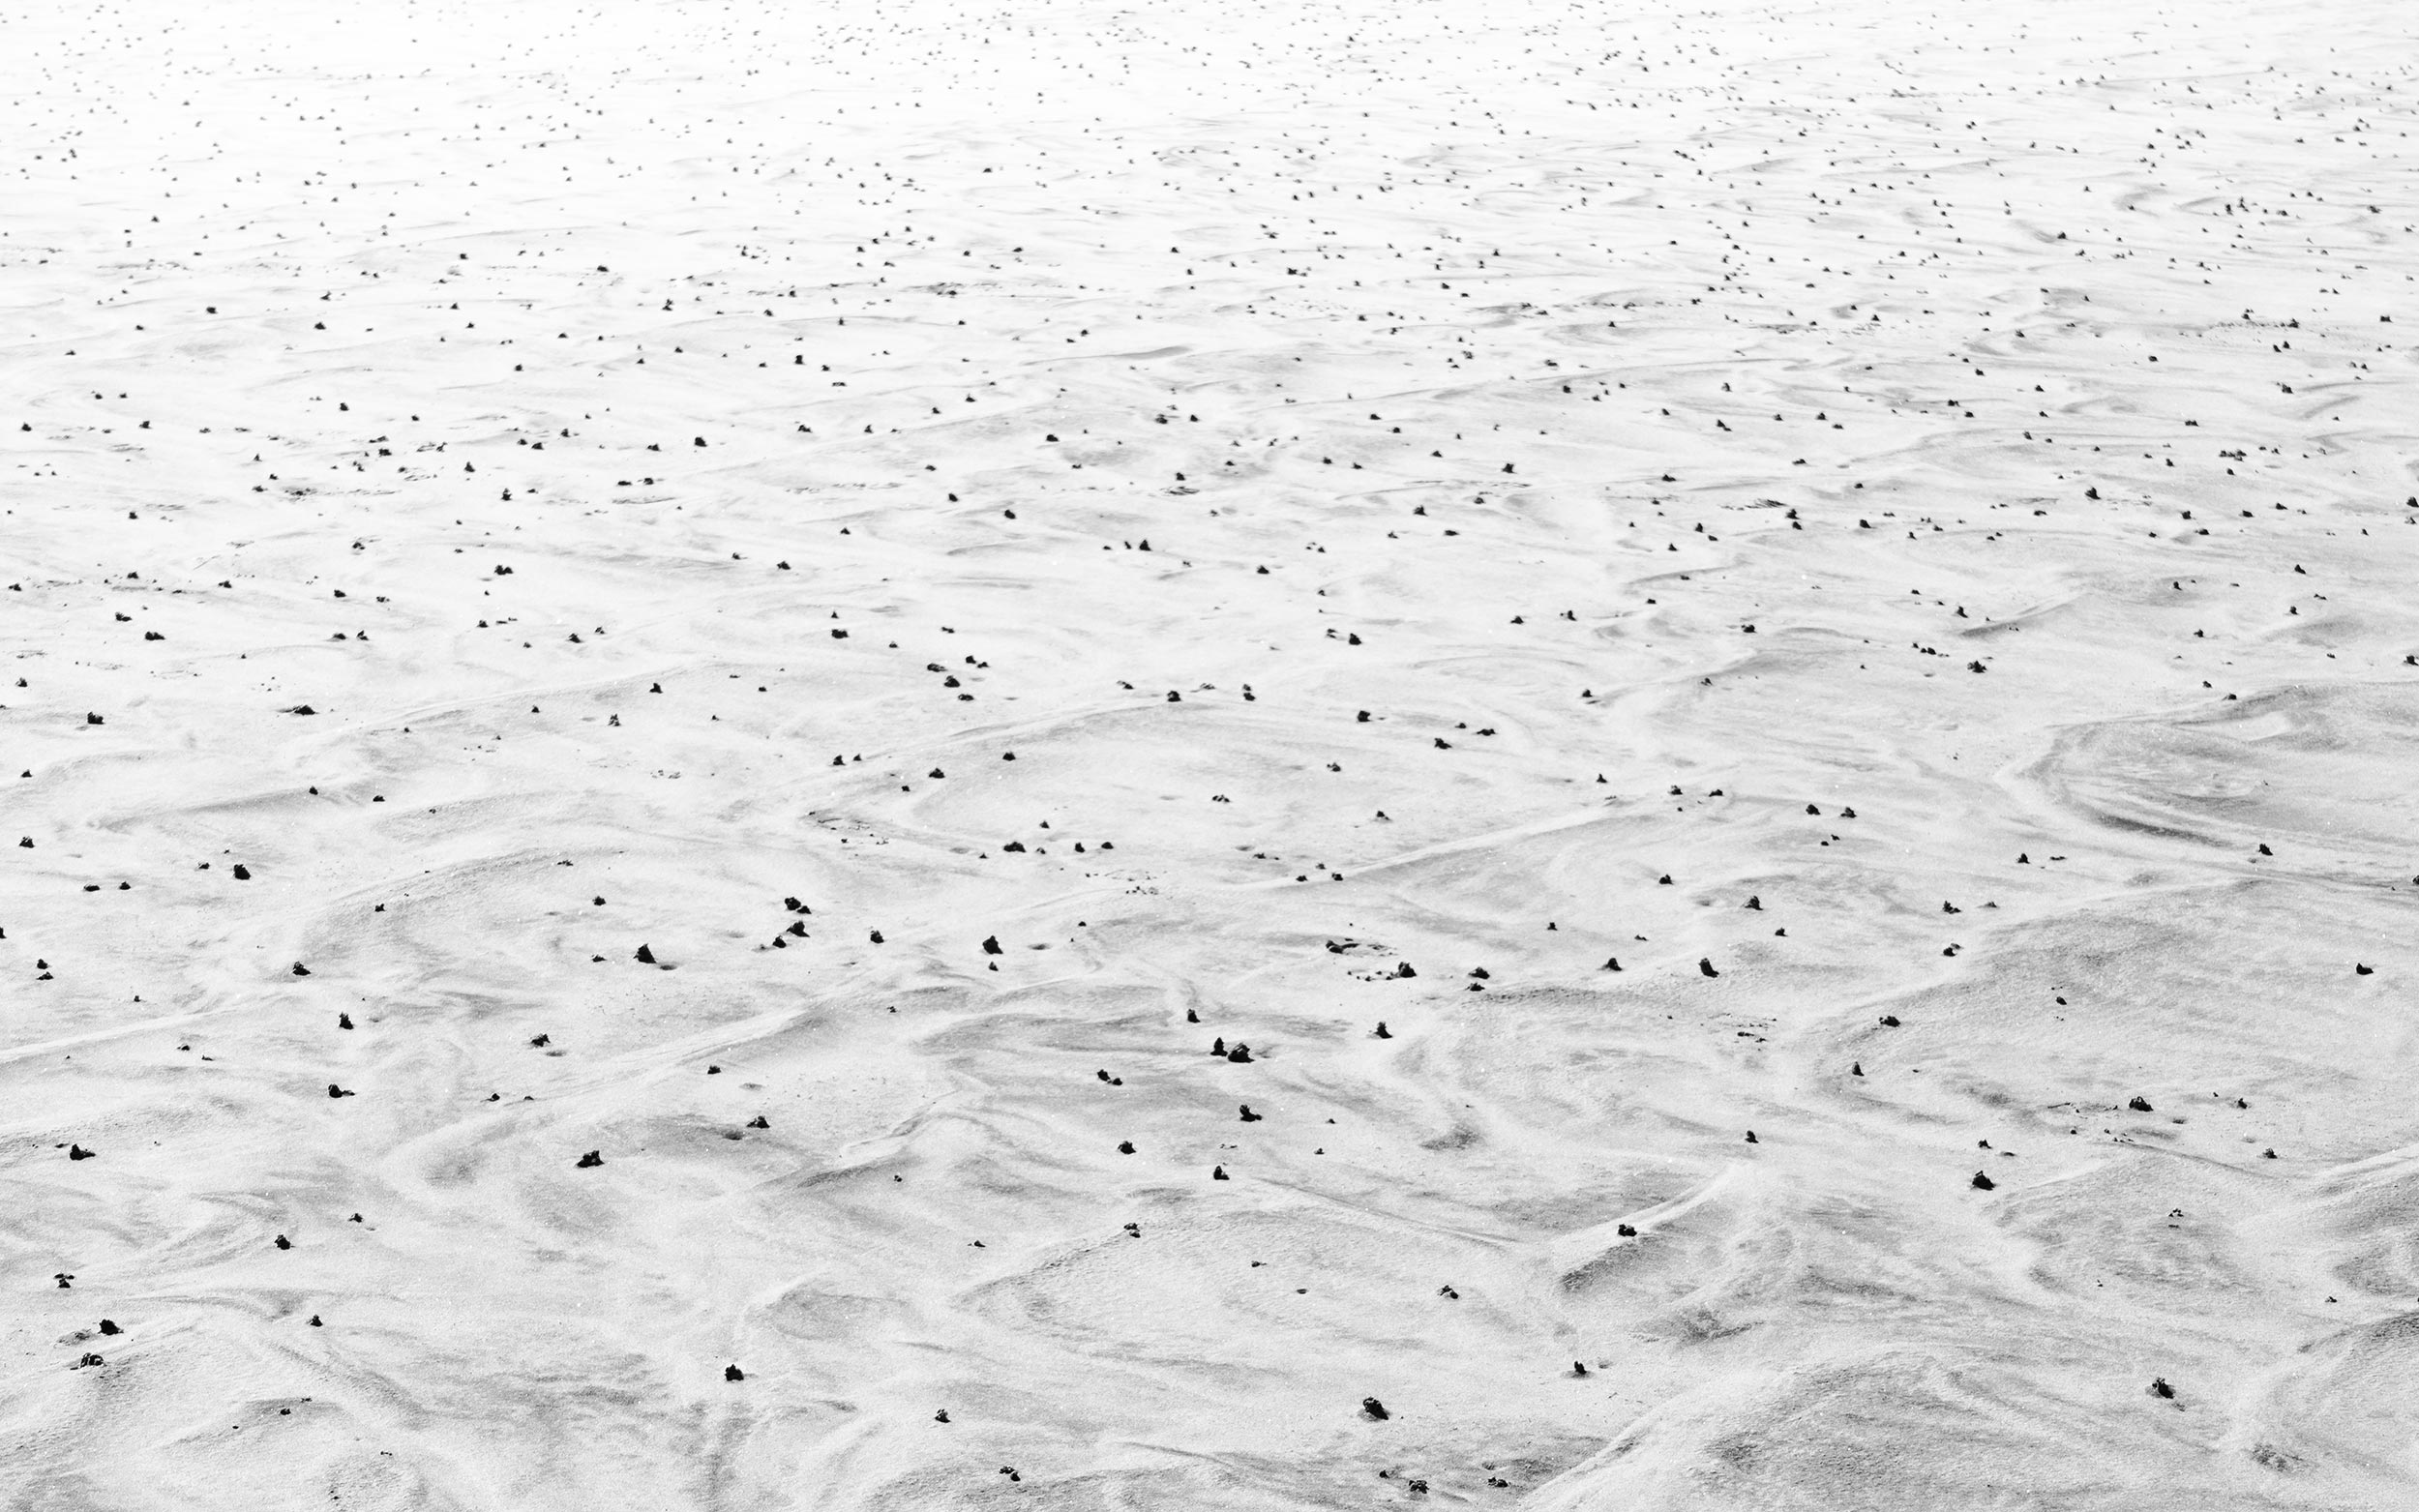 Sand Texture, Abstract Pattern, Black & White